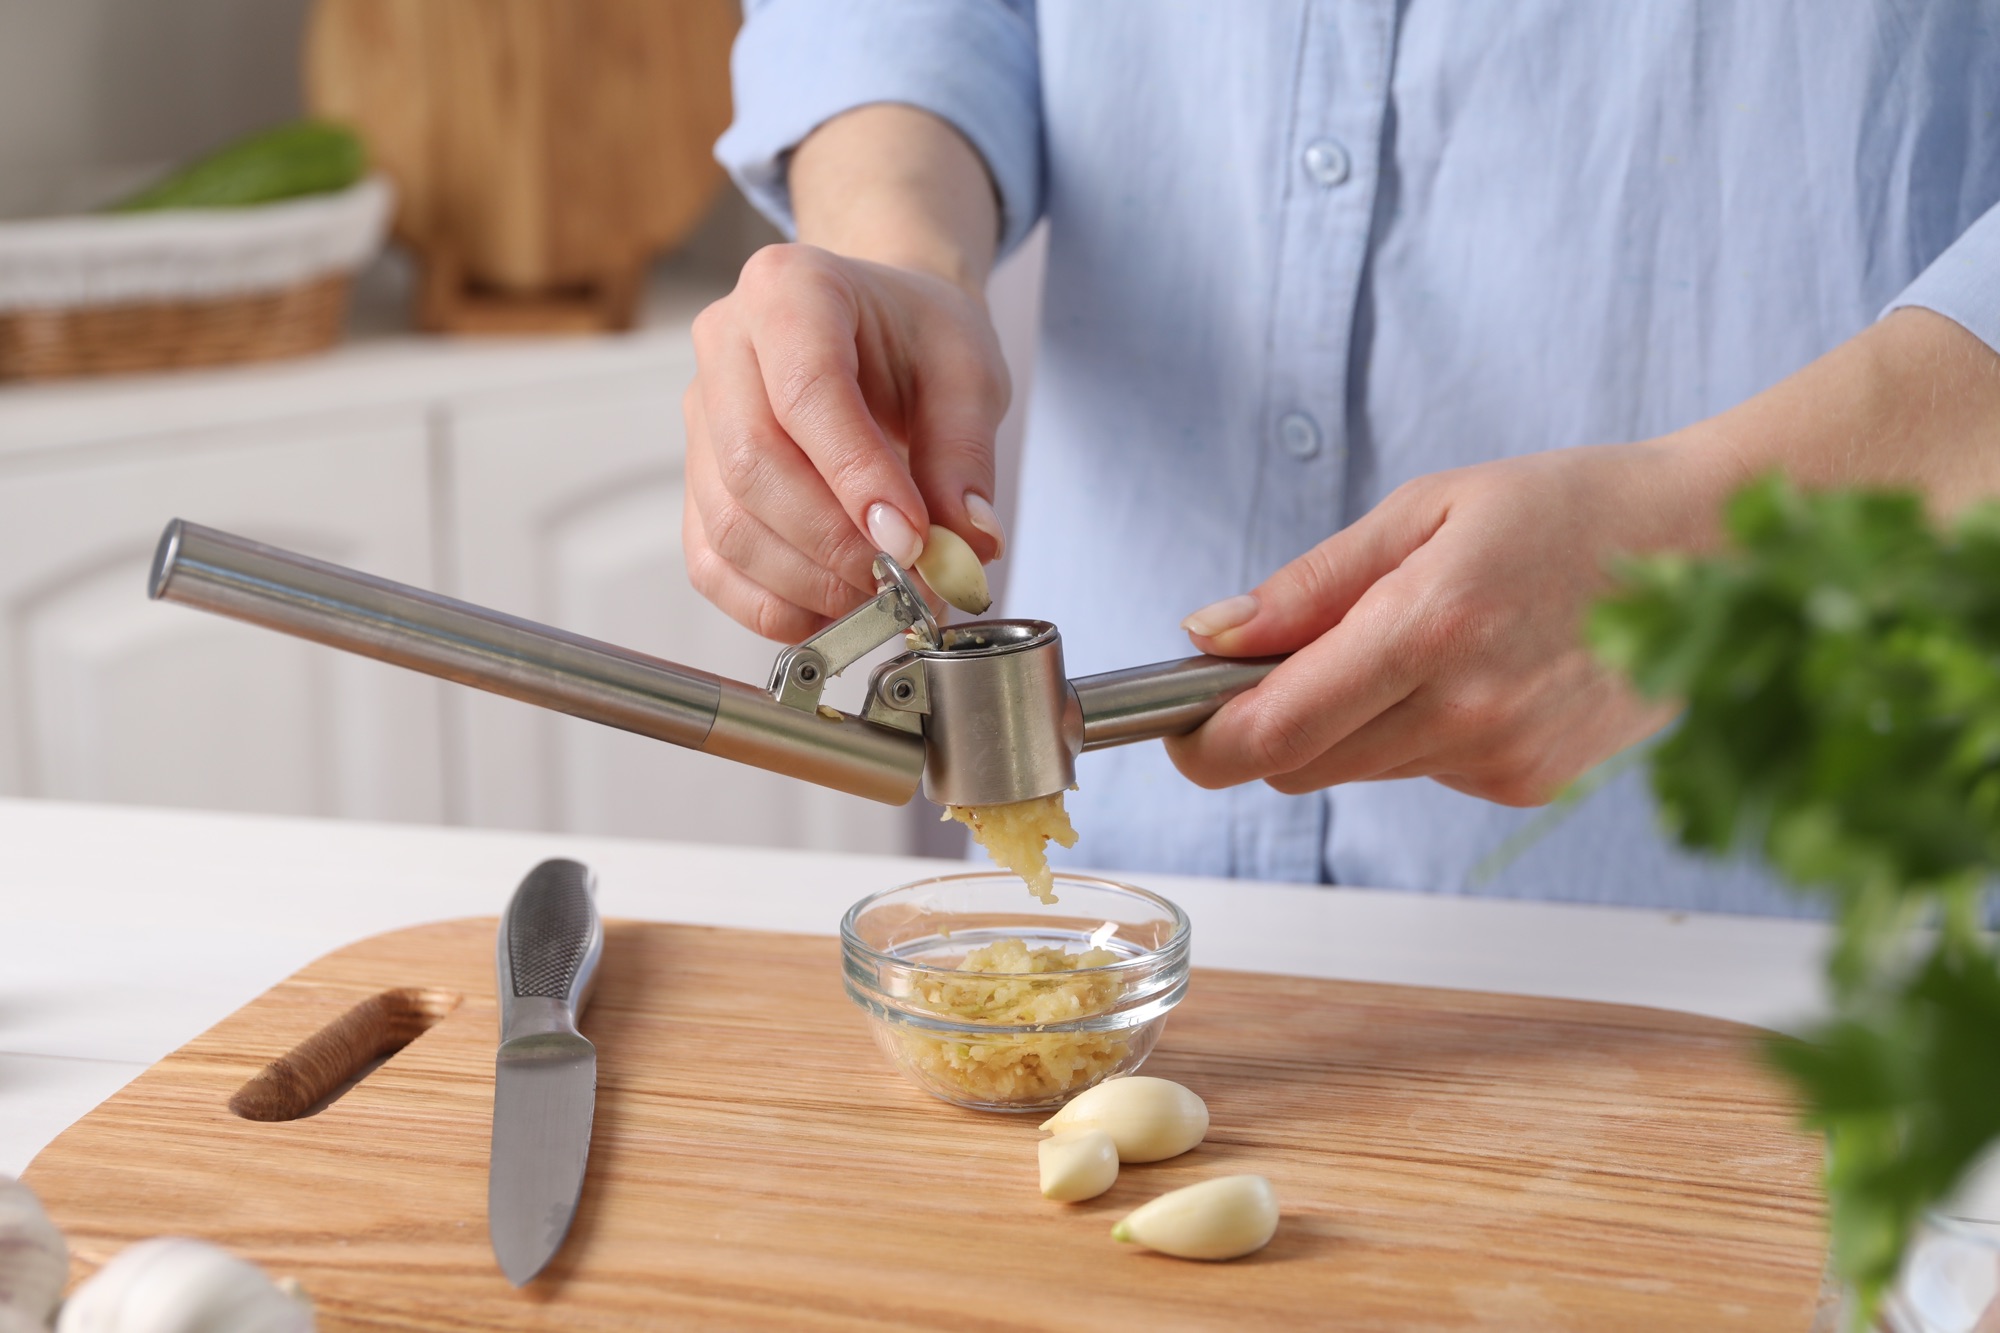 13 Overrated Kitchen Gadgets That Don’t Live Up to the Hype